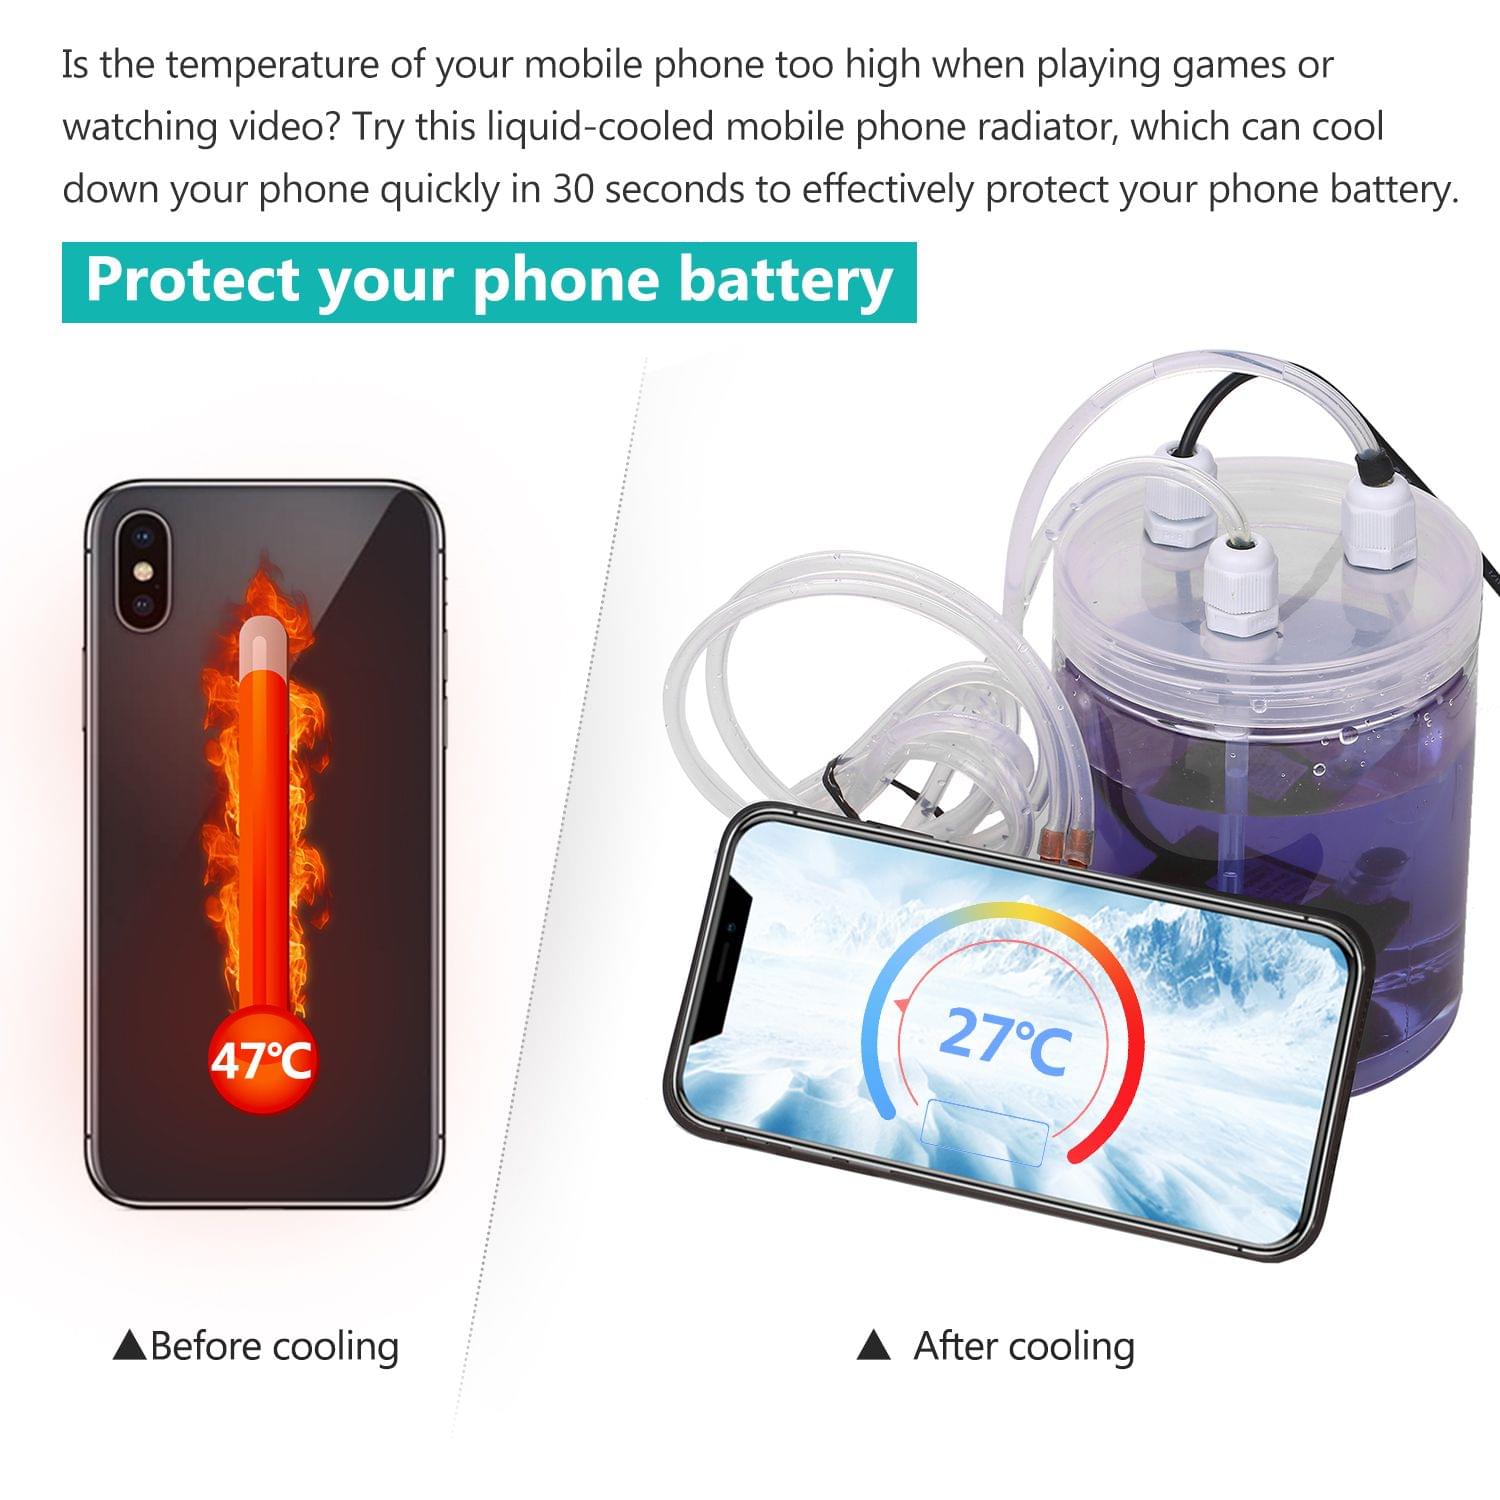 Phone Cooler Mobile Phone Radiator Water-cooled Cooling - Compatible with iPhone X